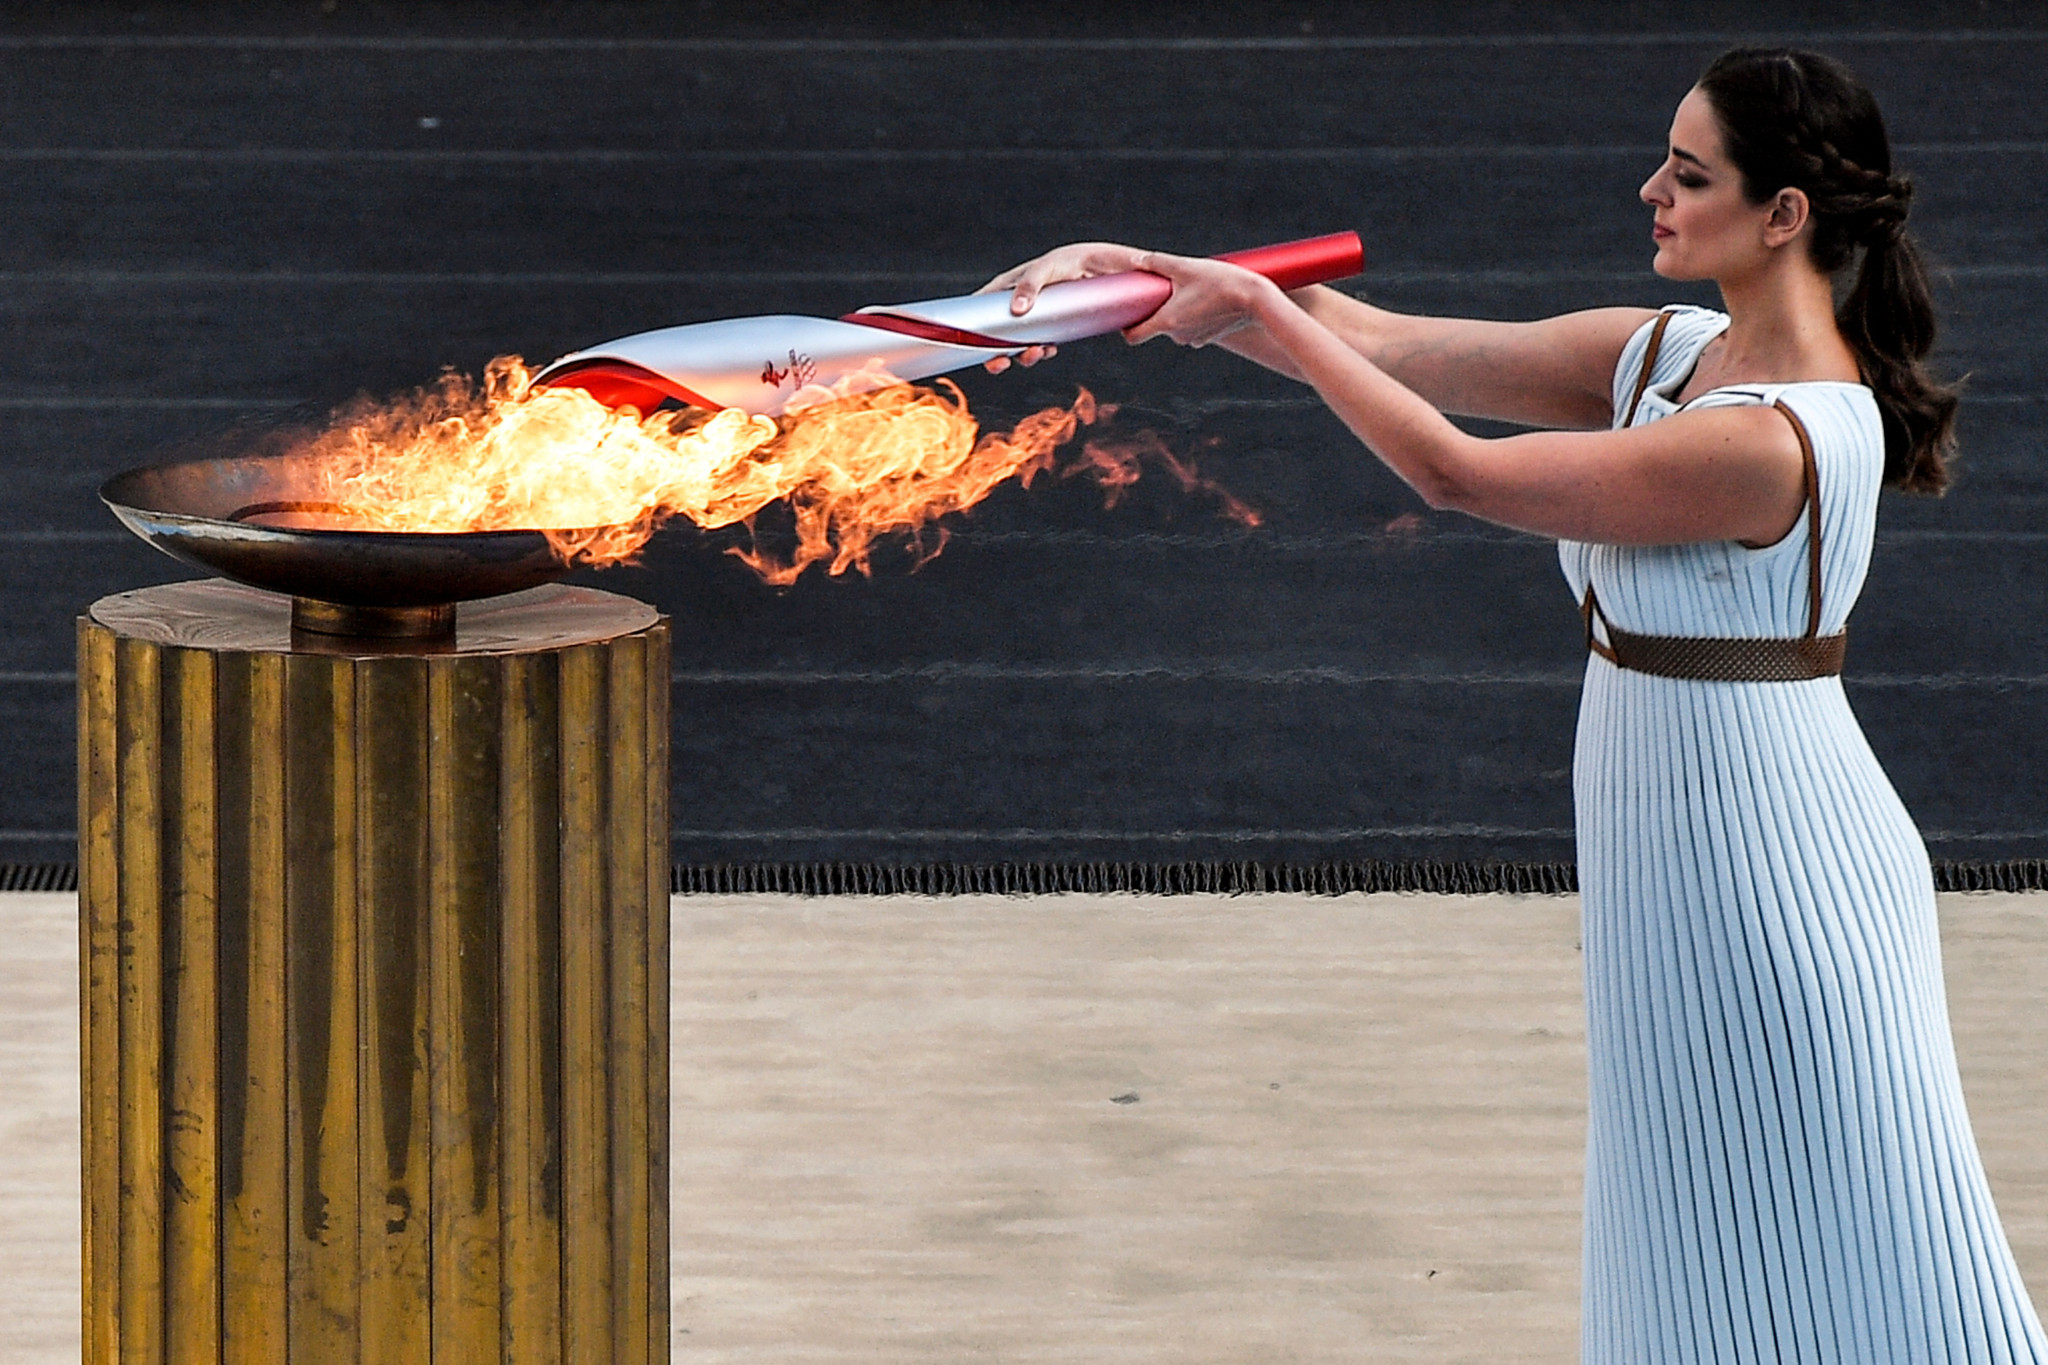 High Priestess Xanthi Georgiou lights the Olympic Flame in Athens before entrusting the Flame to Beijing 2022 ©Getty Images